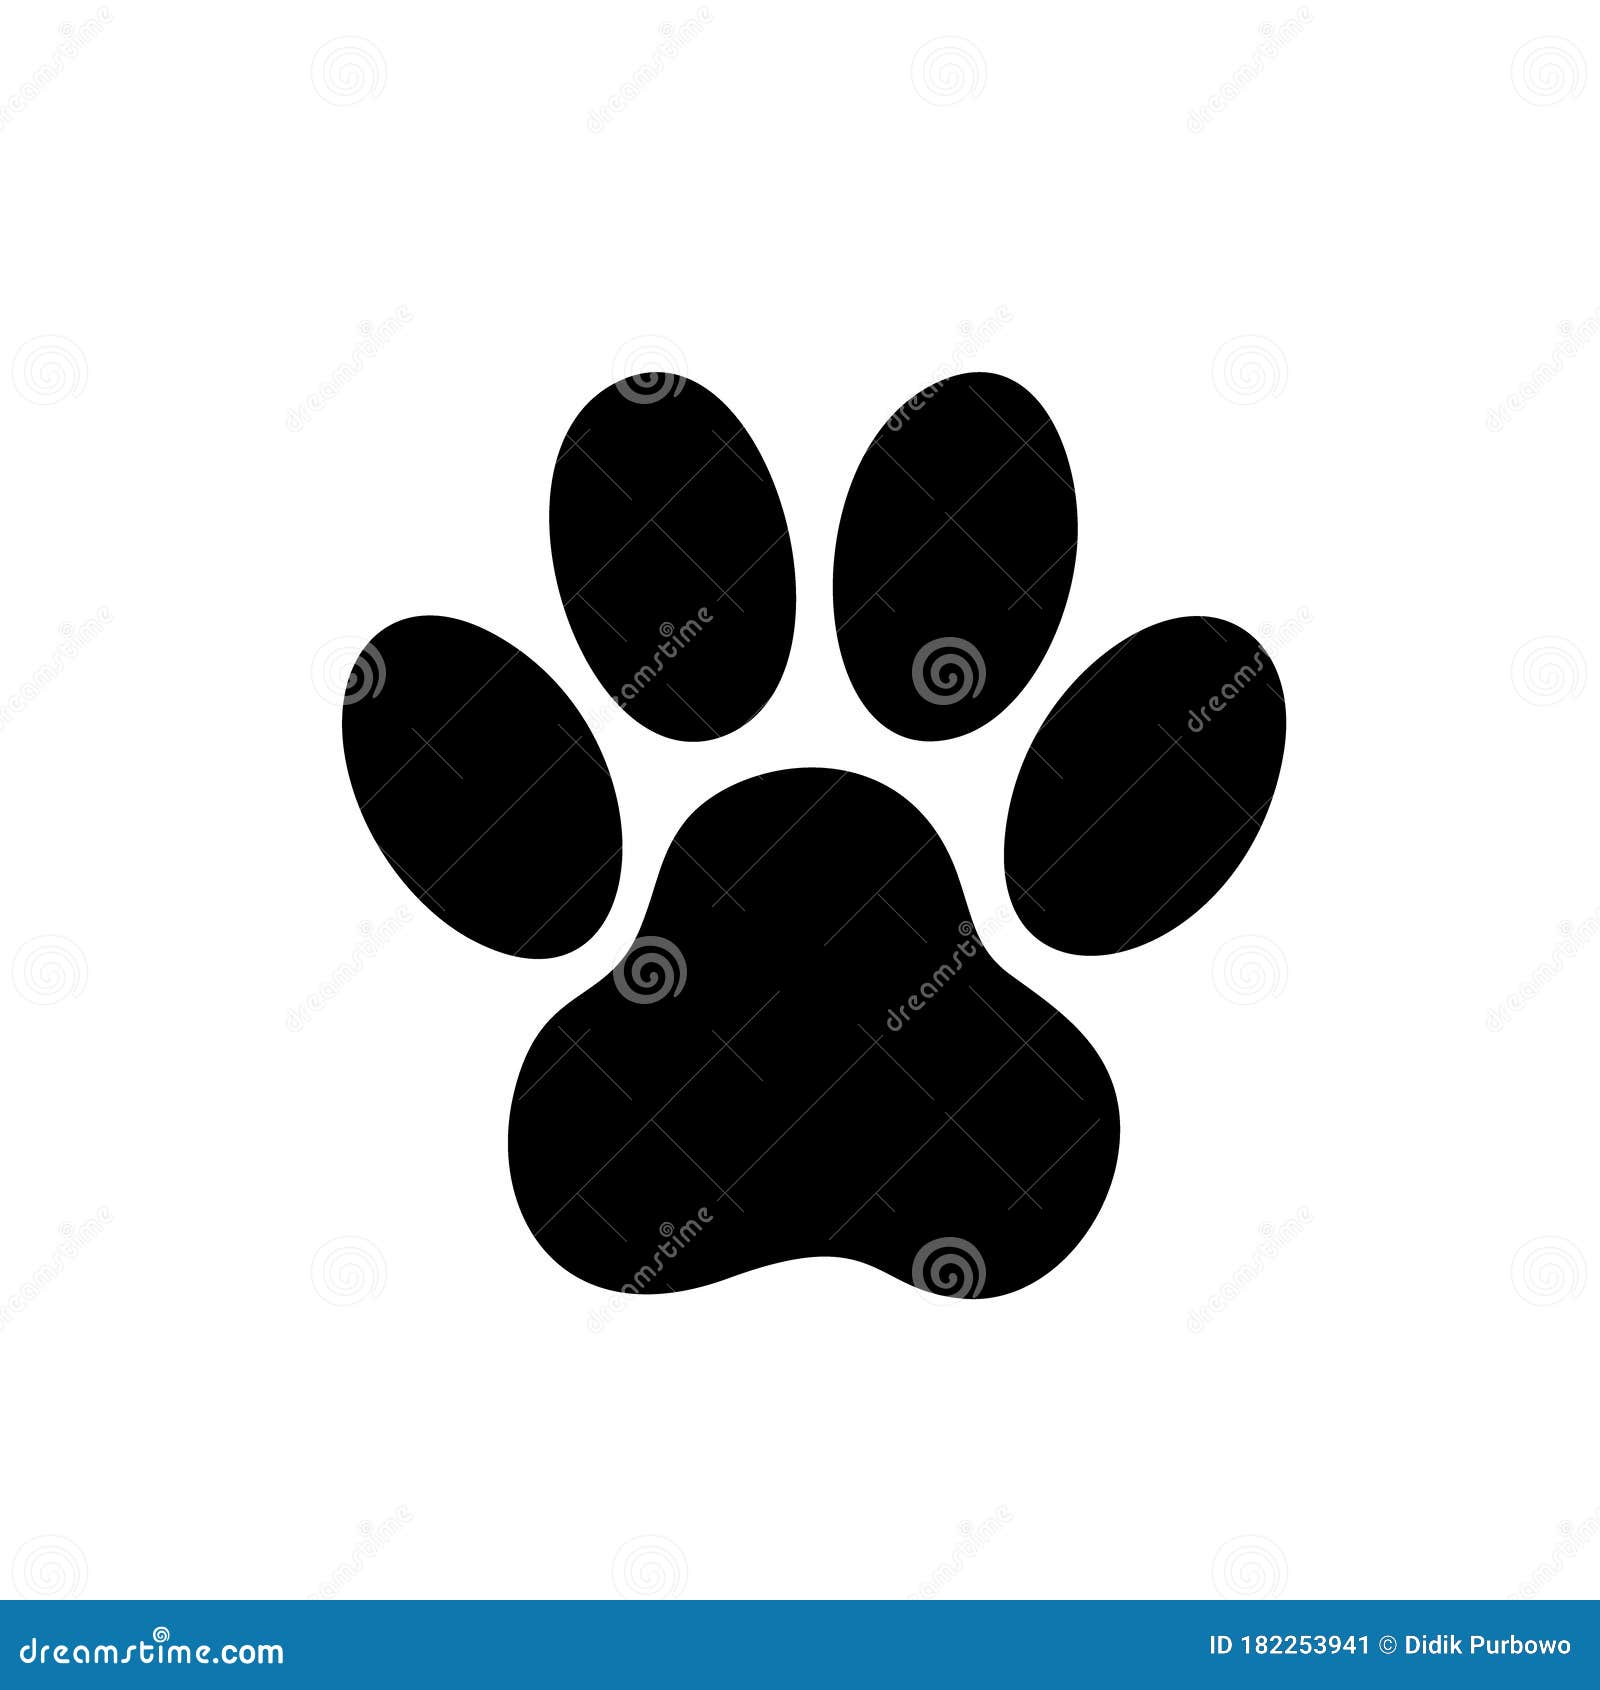 Cat Paw Prints White Transparent, Stylish Black Cat Paw Print Icon Vector  Illustration, Cat Icons, Black Icons, Paw Icons PNG Image For Free Download